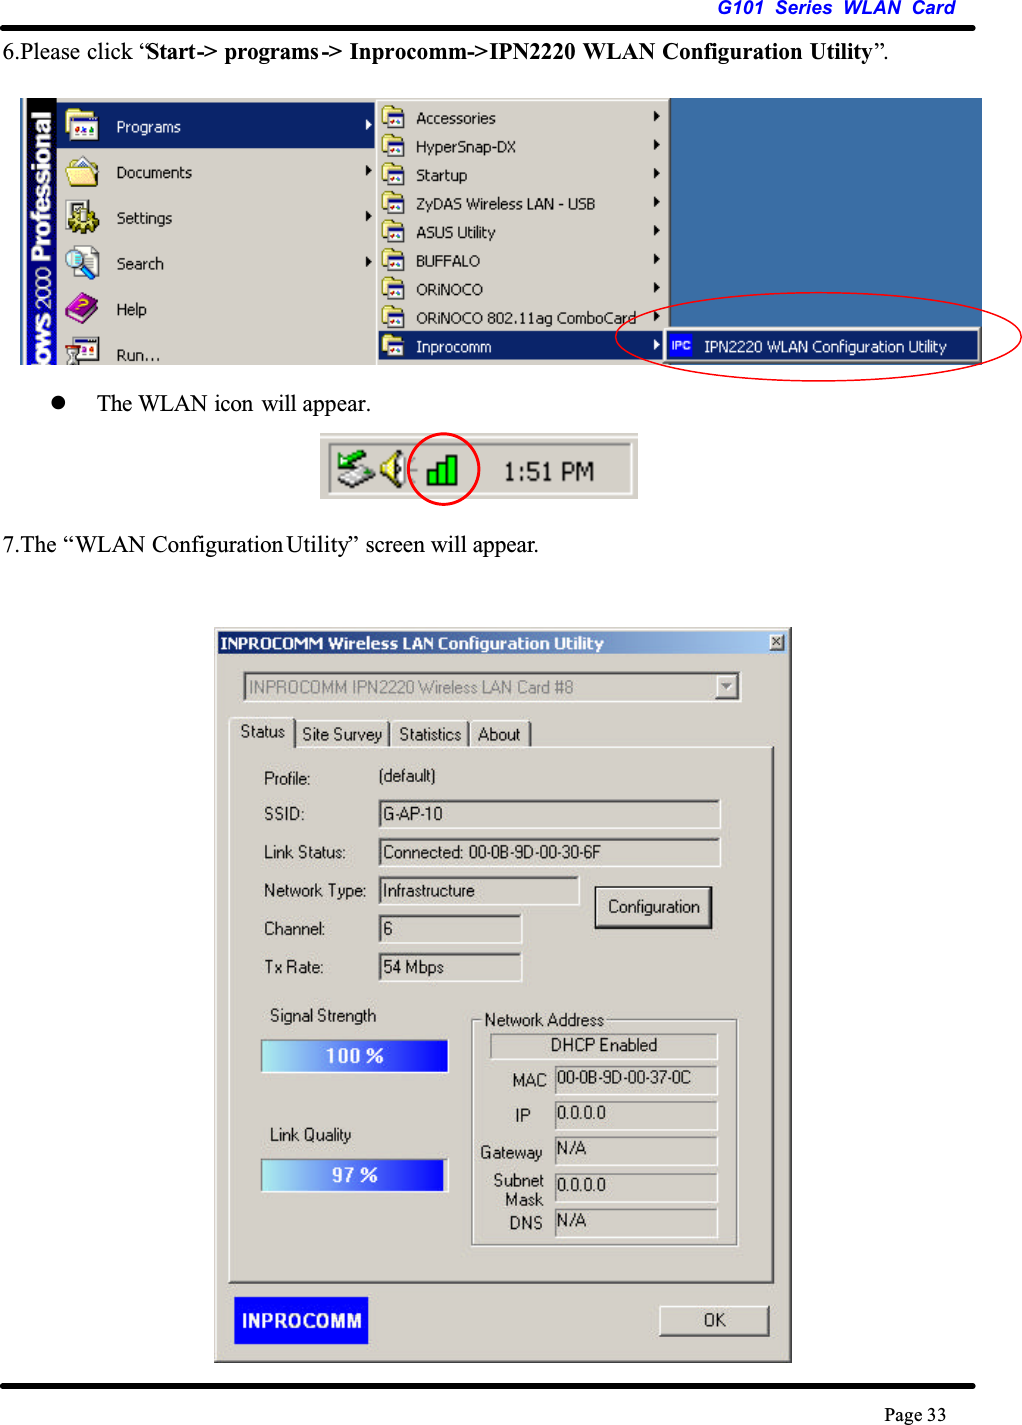 G101 Series WLAN CardPage 336.Please click “Start-&gt; programs -&gt; Inprocomm-&gt;IPN2220 WLAN Configuration Utility”.zThe WLAN icon  will appear.7.The “WLAN Configuration Utility” screen will appear.